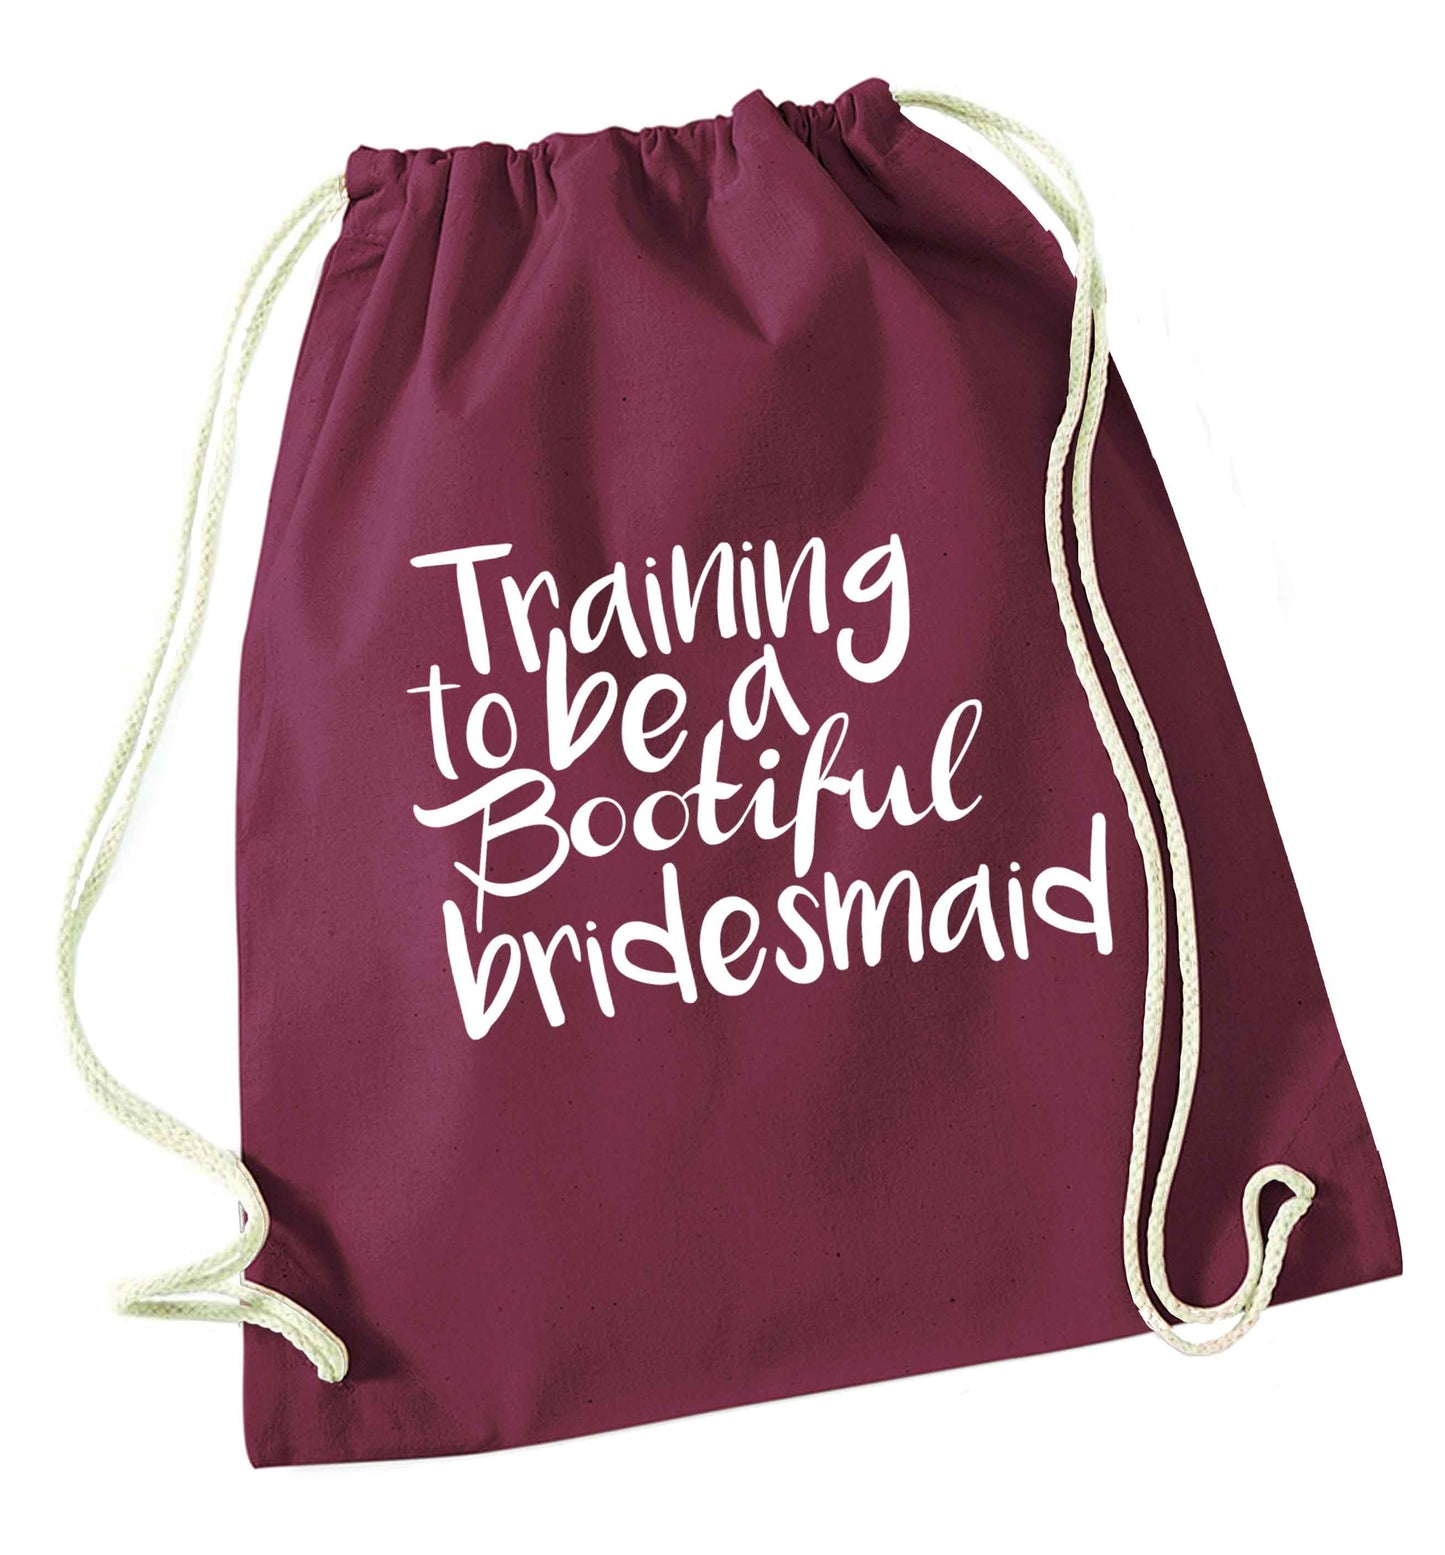 Get motivated and get fit for your big day! Our workout quotes and designs will get you ready to sweat! Perfect for any bride, groom or bridesmaid to be!  maroon drawstring bag